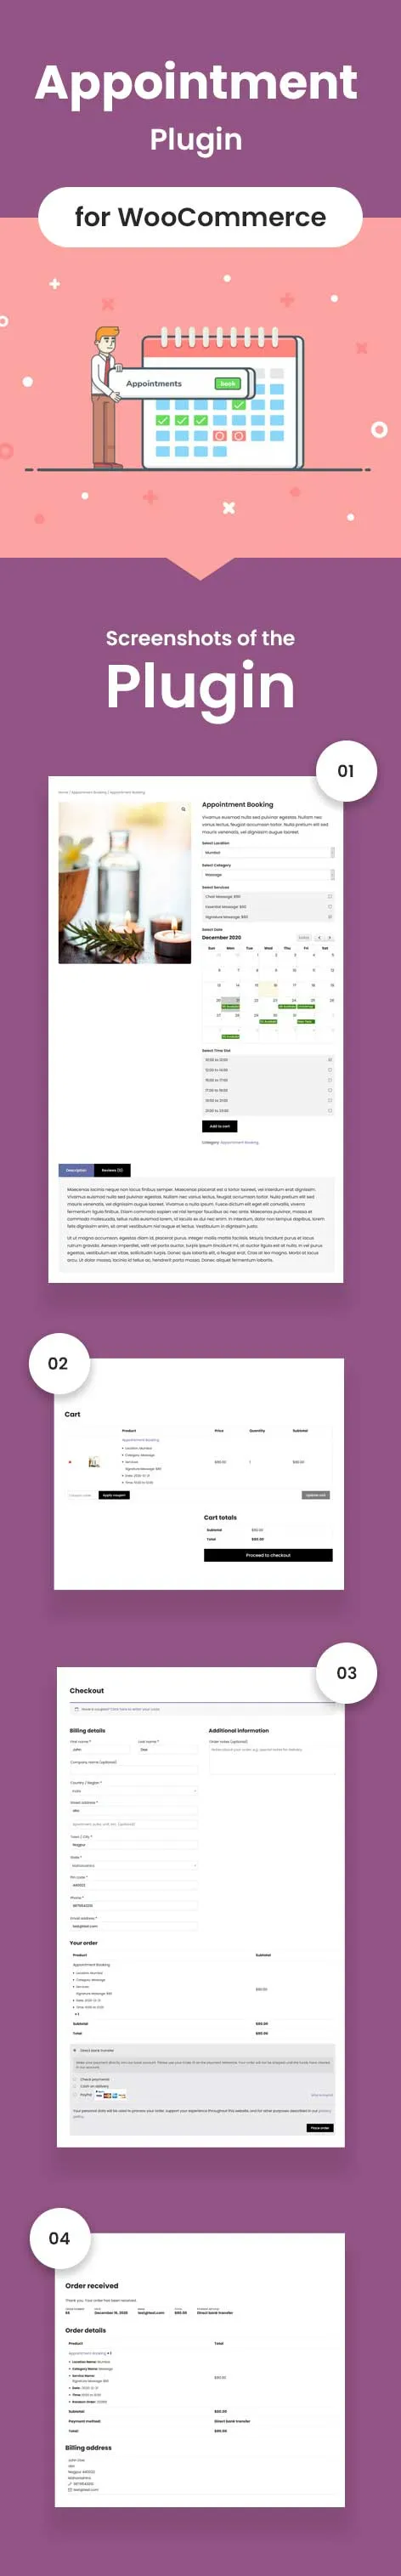 WooCommerce Appointment Plugin